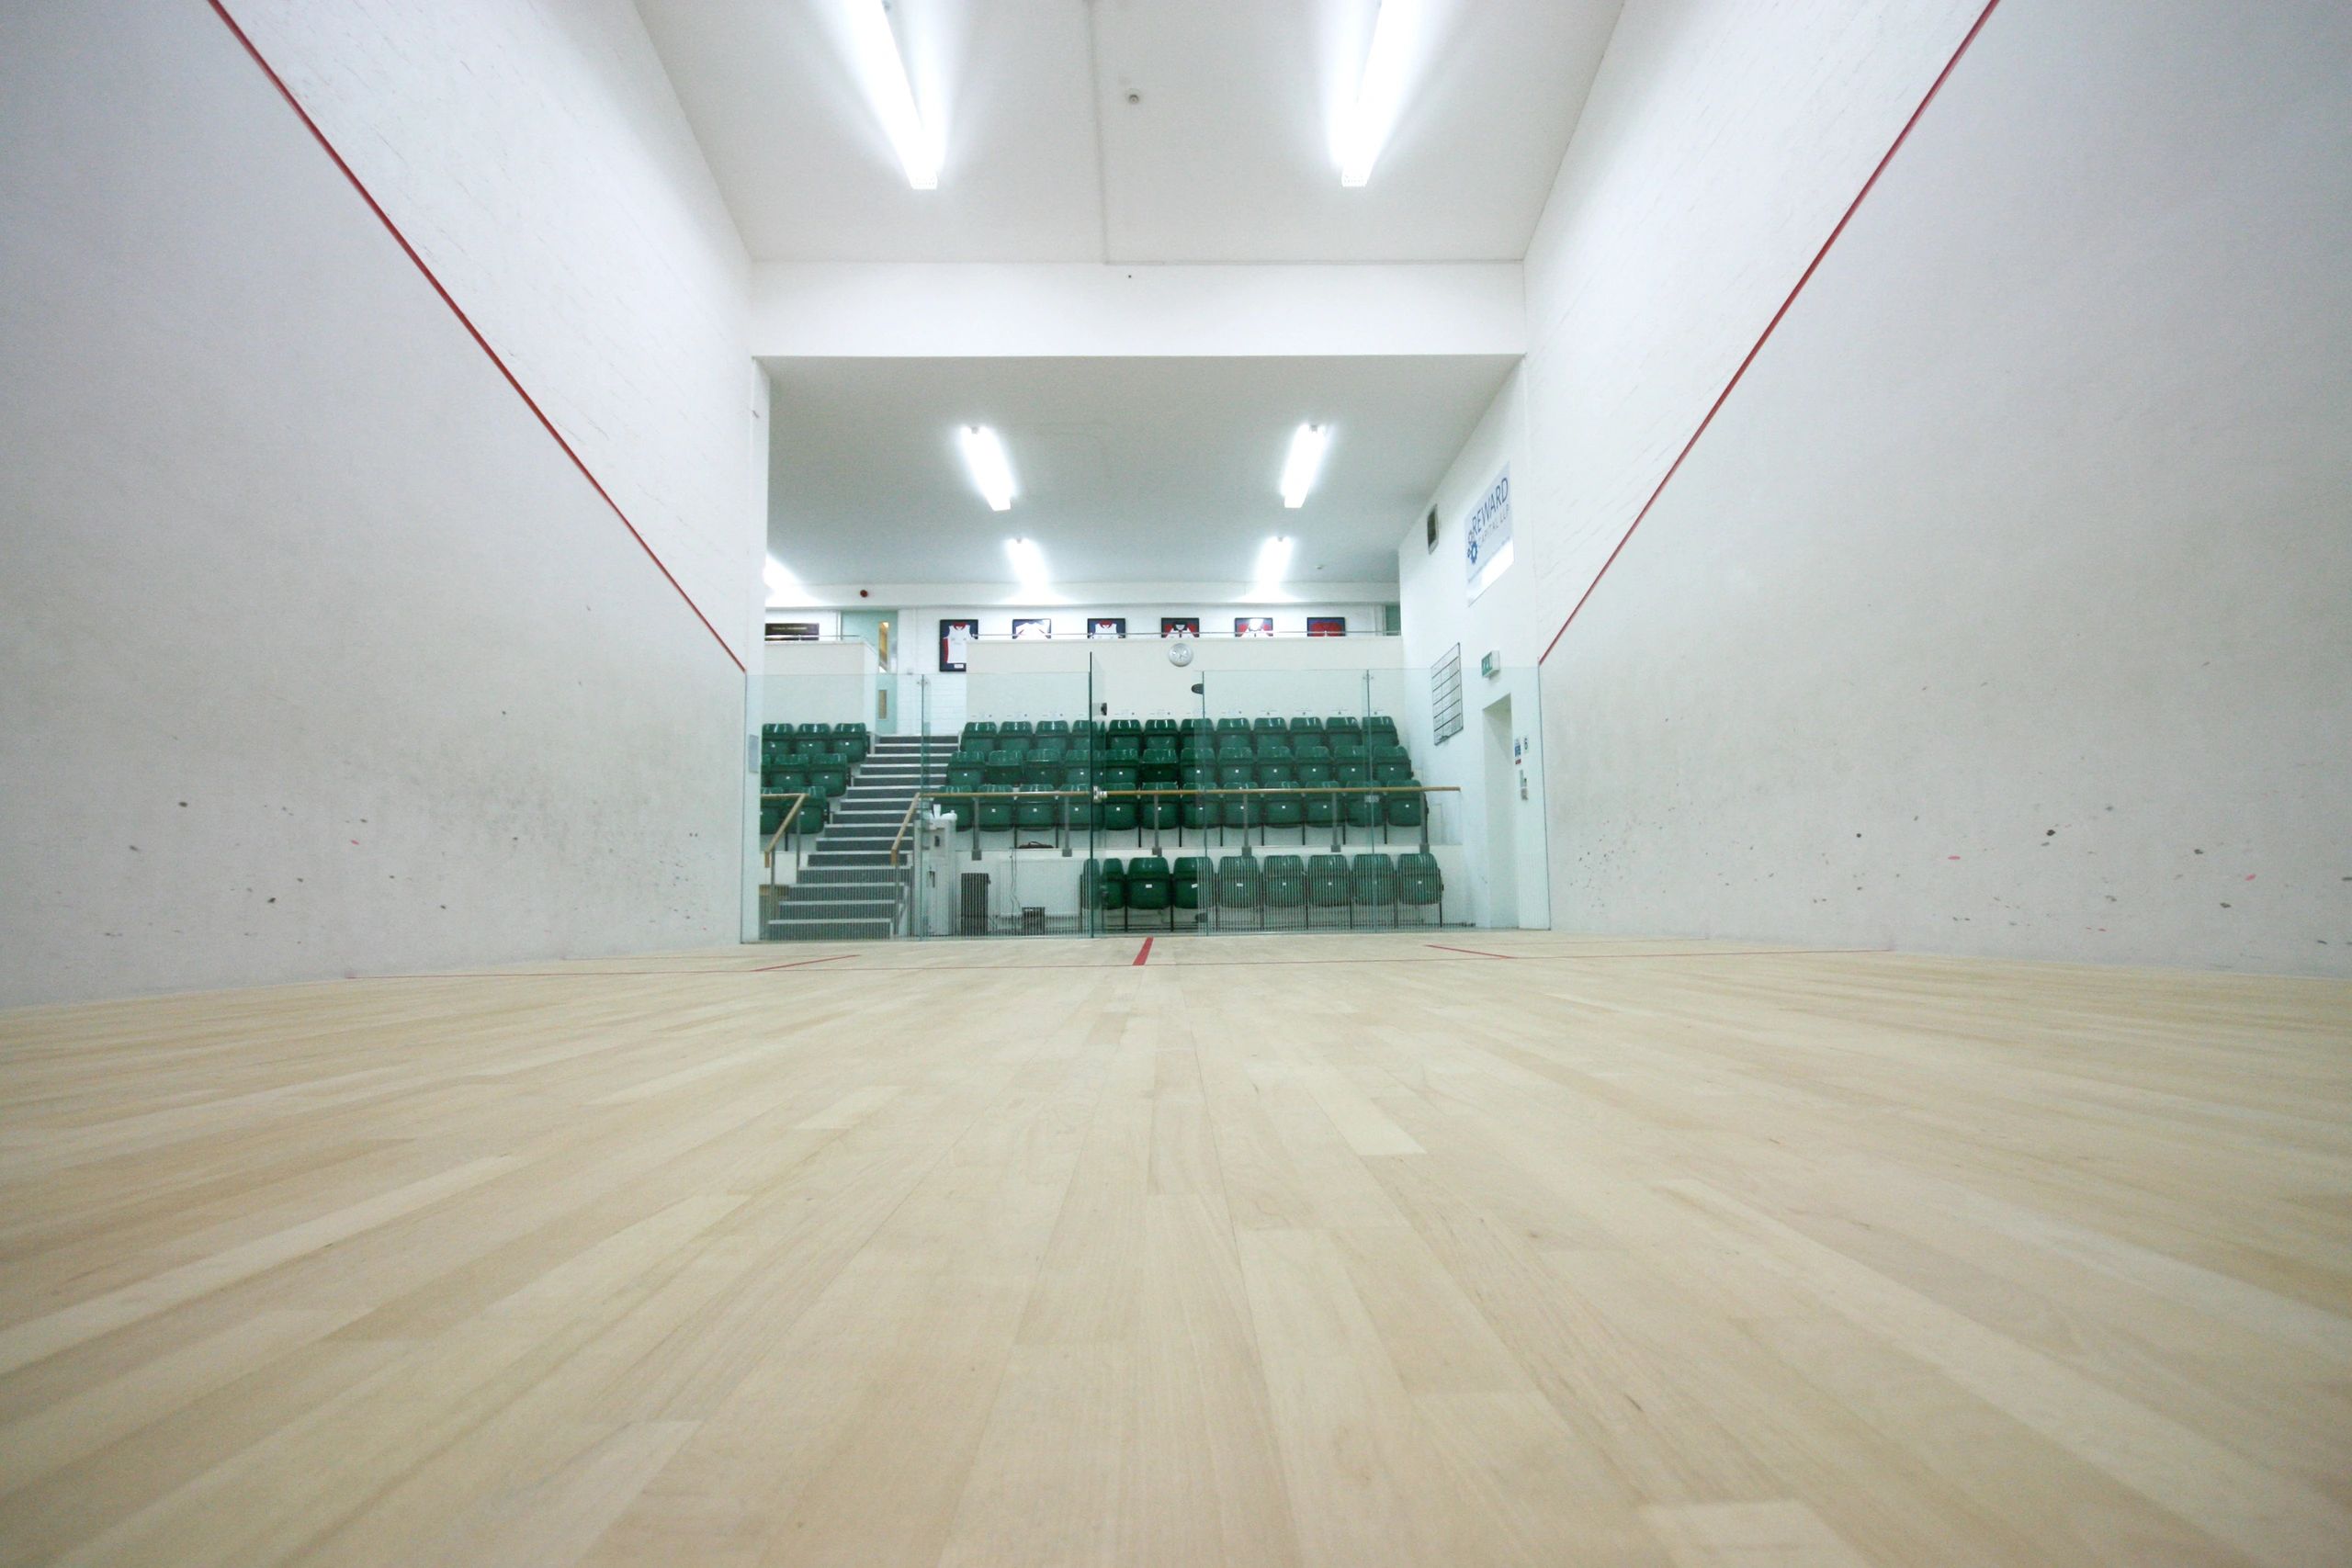 Squash courts in Leeds